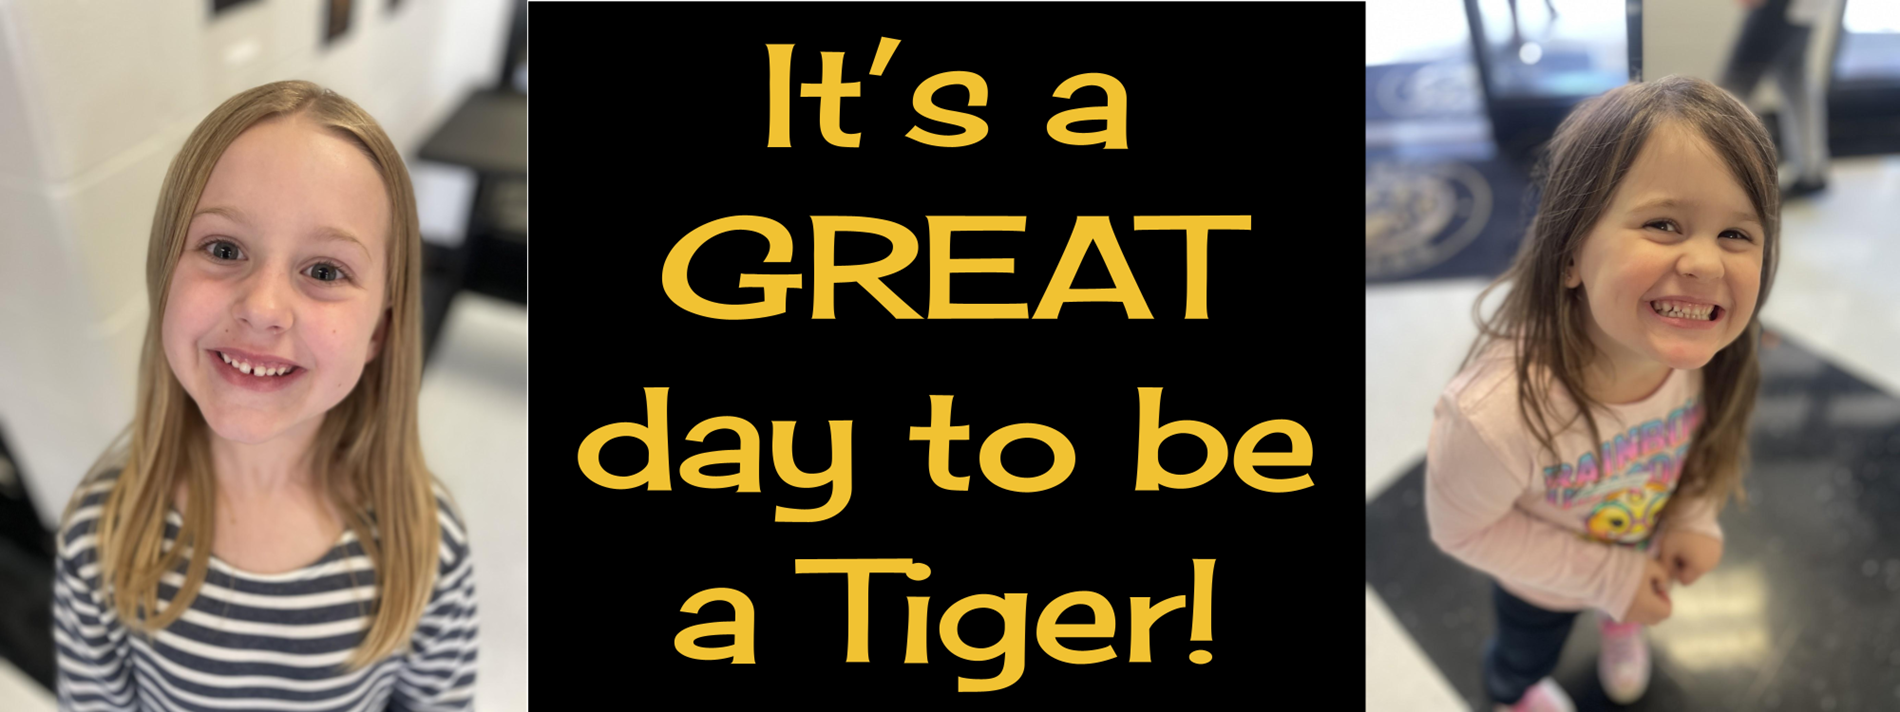 It's a great day to be a Tiger!